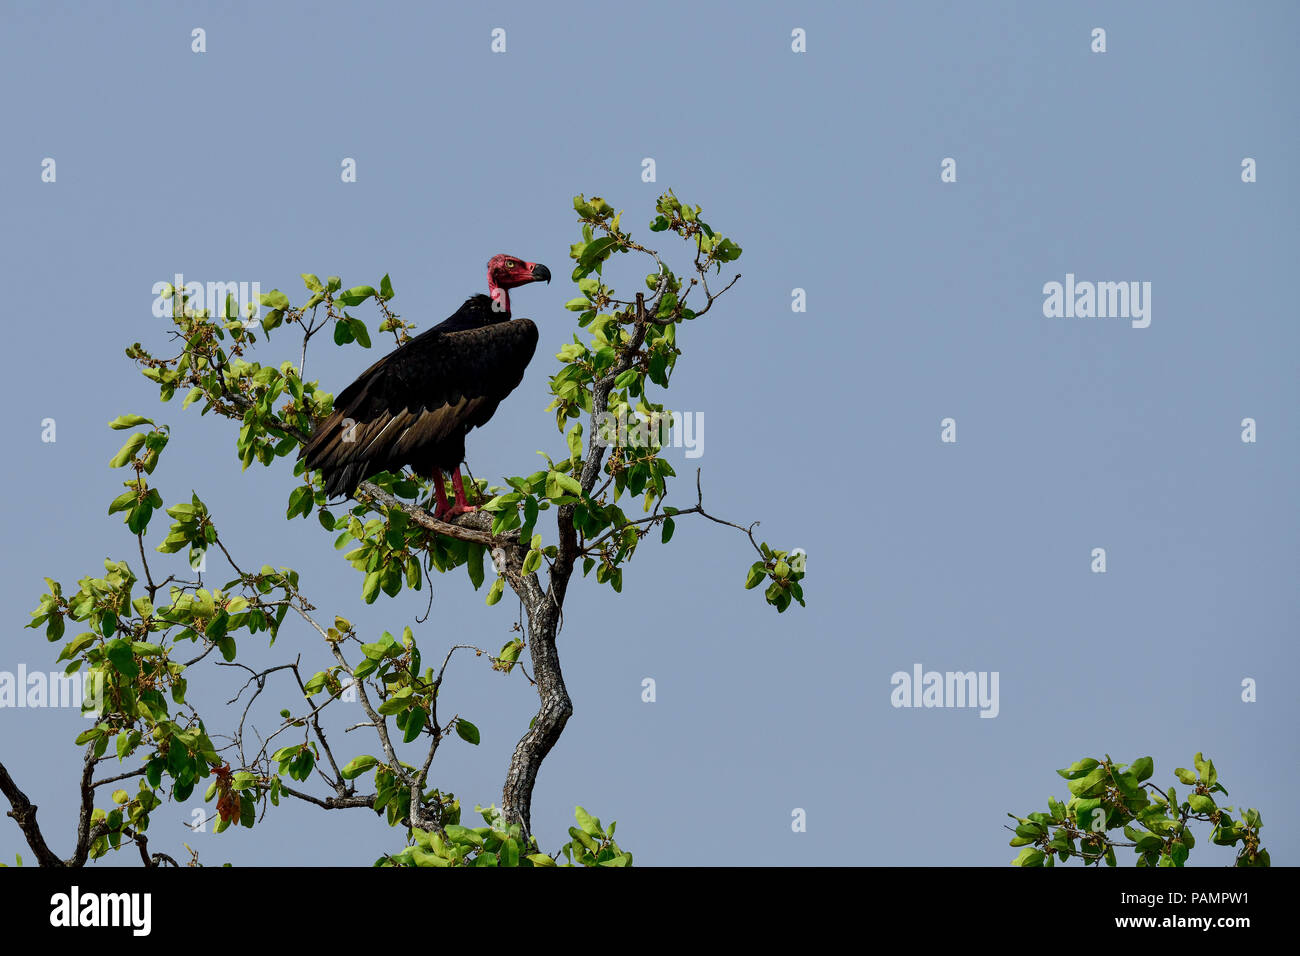 The red-headed vulture, also known as the Asian king vulture, Indian black vulture or Pondicherry vulture, is an Old World vulture Stock Photo